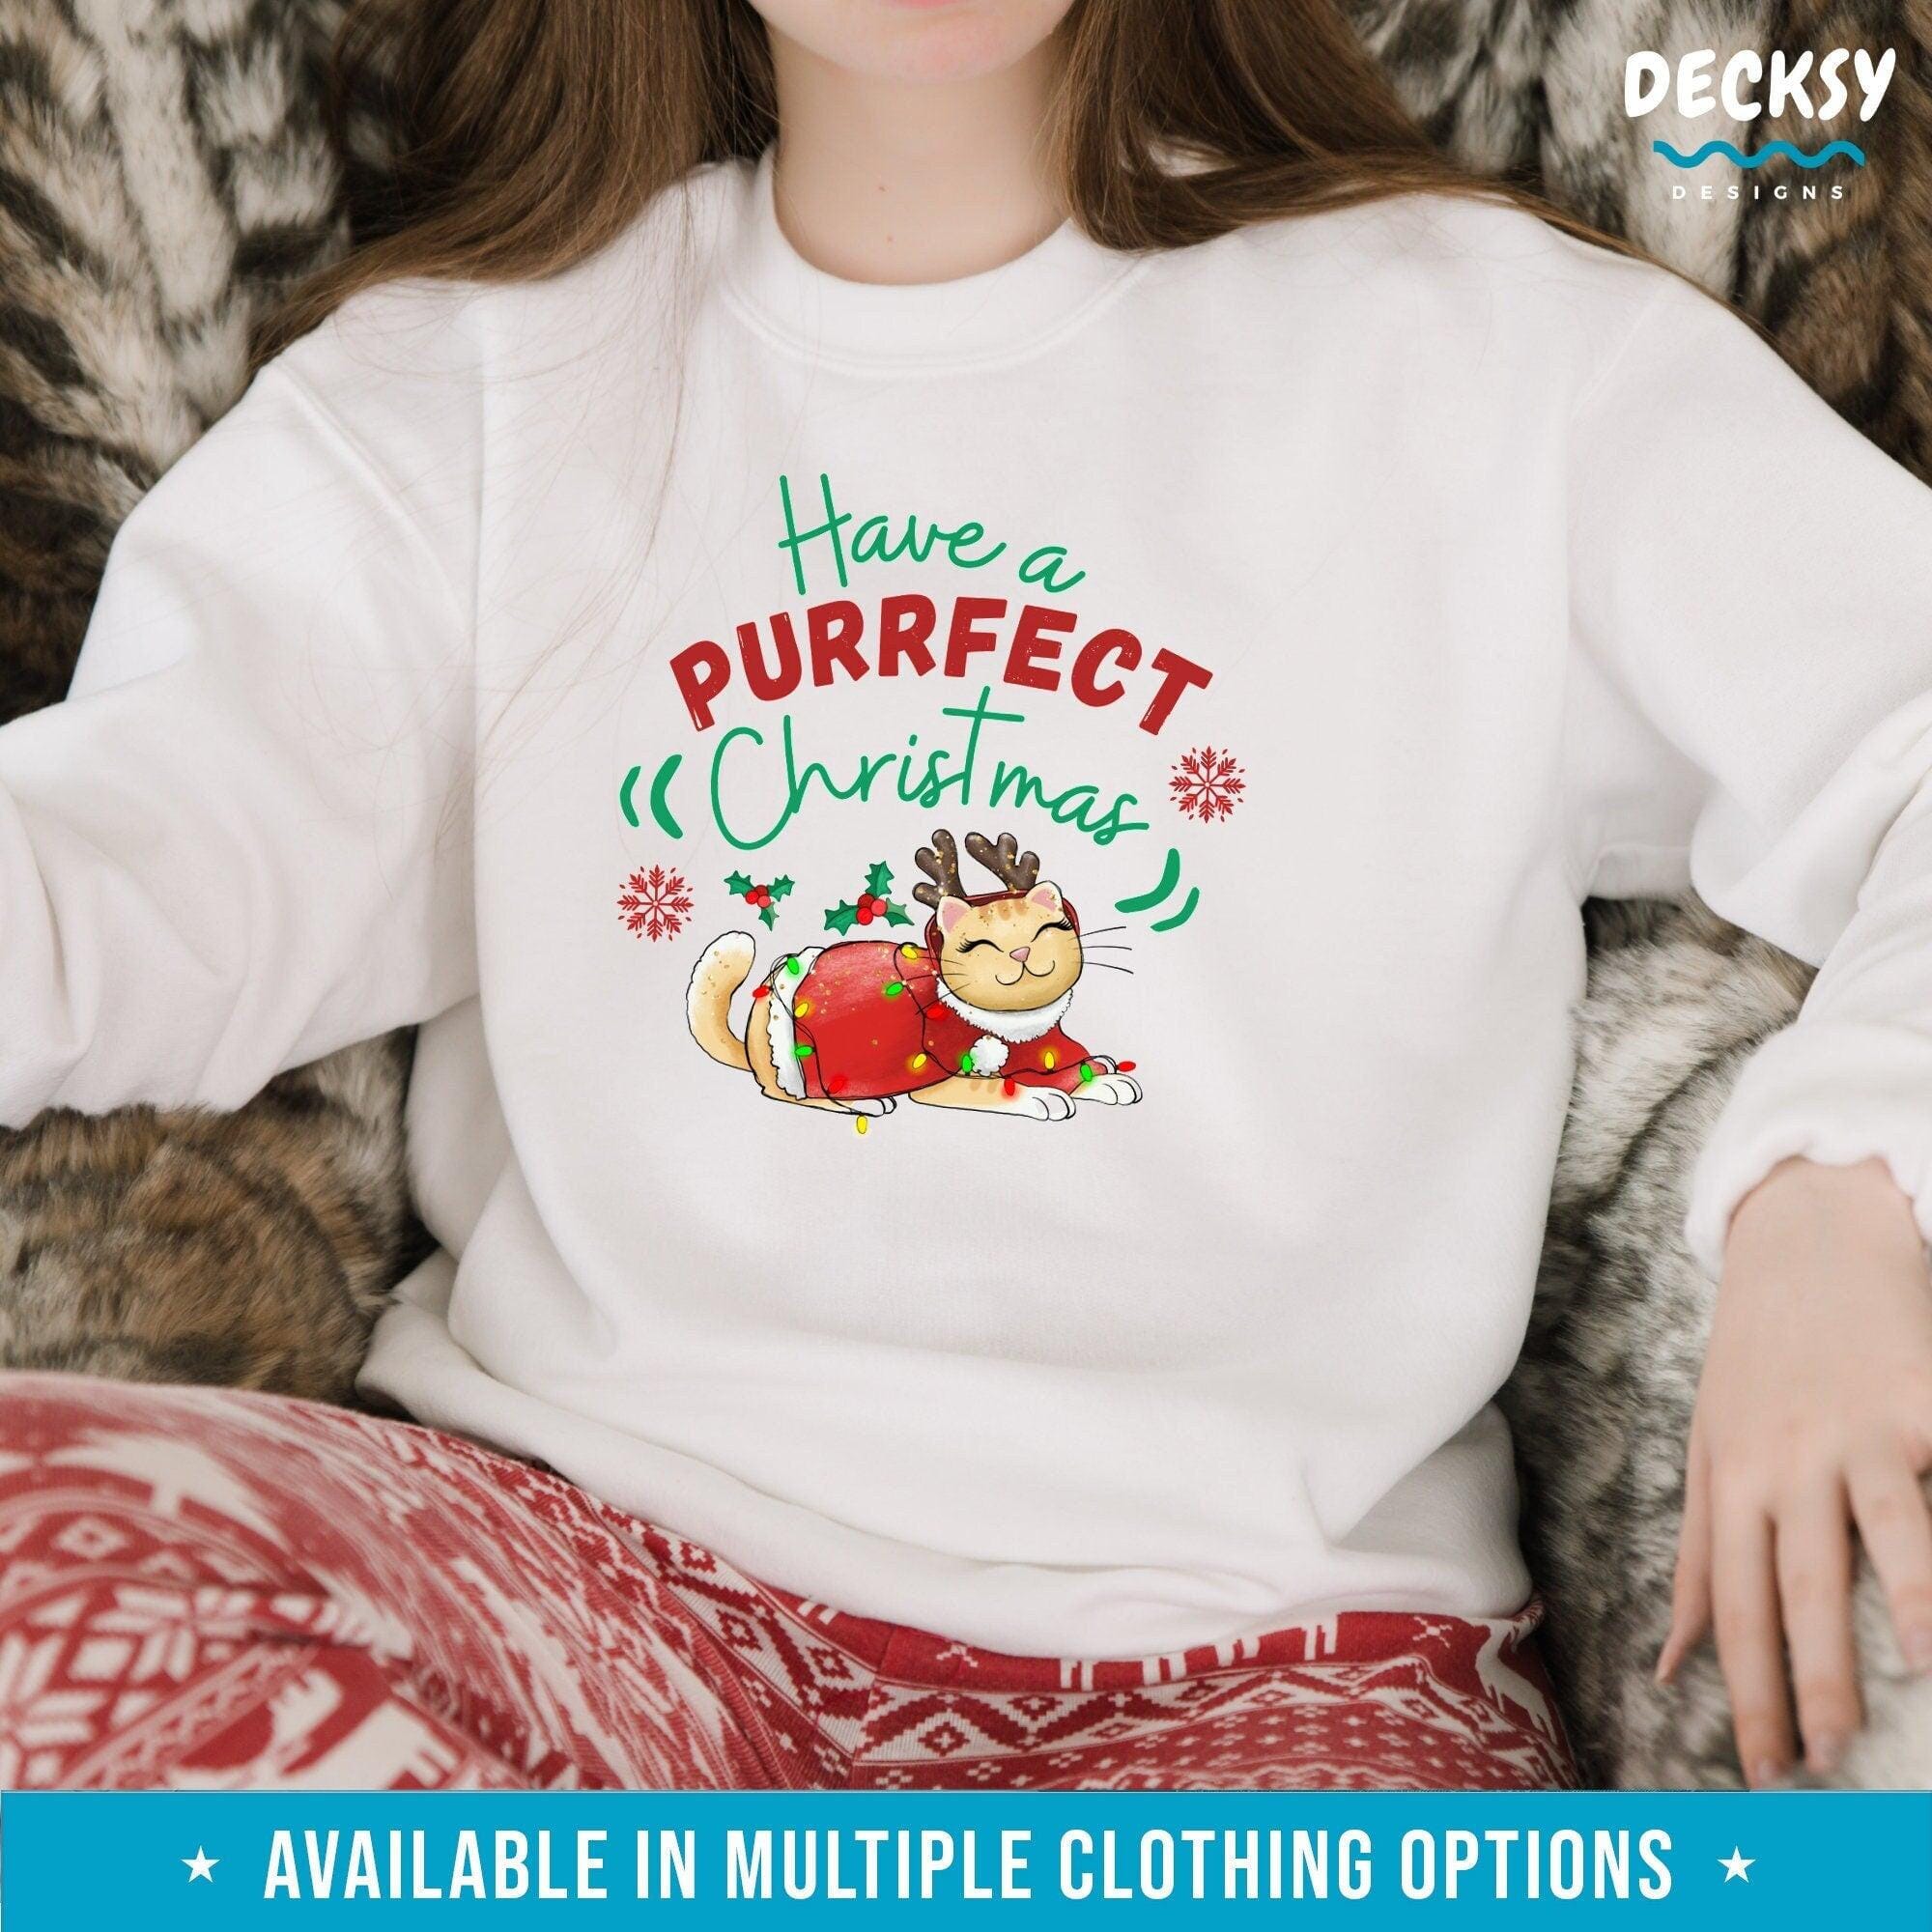 Cute Christmas Cat Shirt, Gift for Cat Owner-Clothing:Gender-Neutral Adult Clothing:Tops & Tees:T-shirts:Graphic Tees-DecksyDesigns